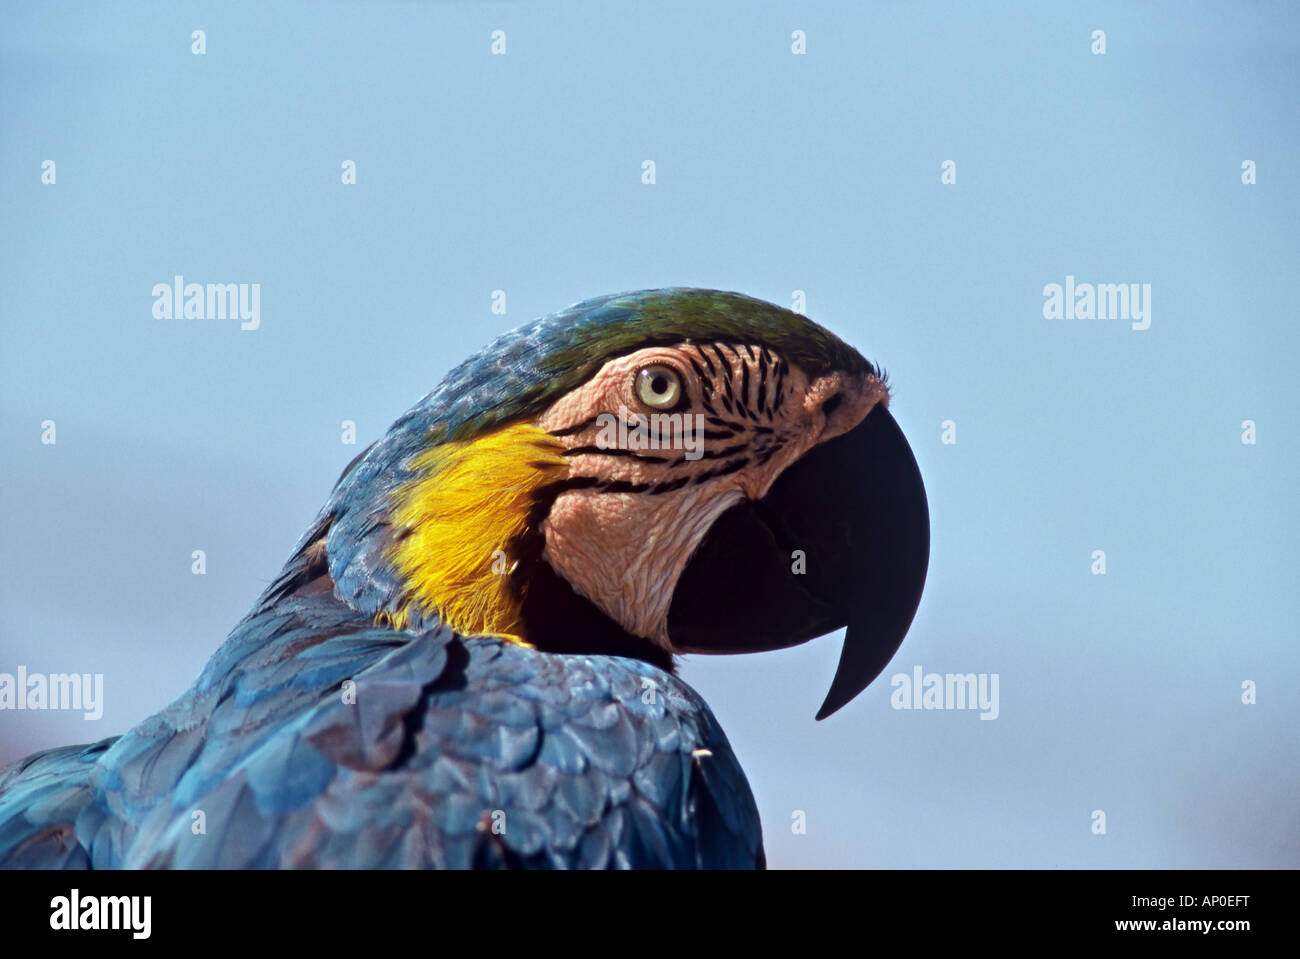 Over the shoulder close up portrait of a Gold Blue Macaw Parrot Stock Photo